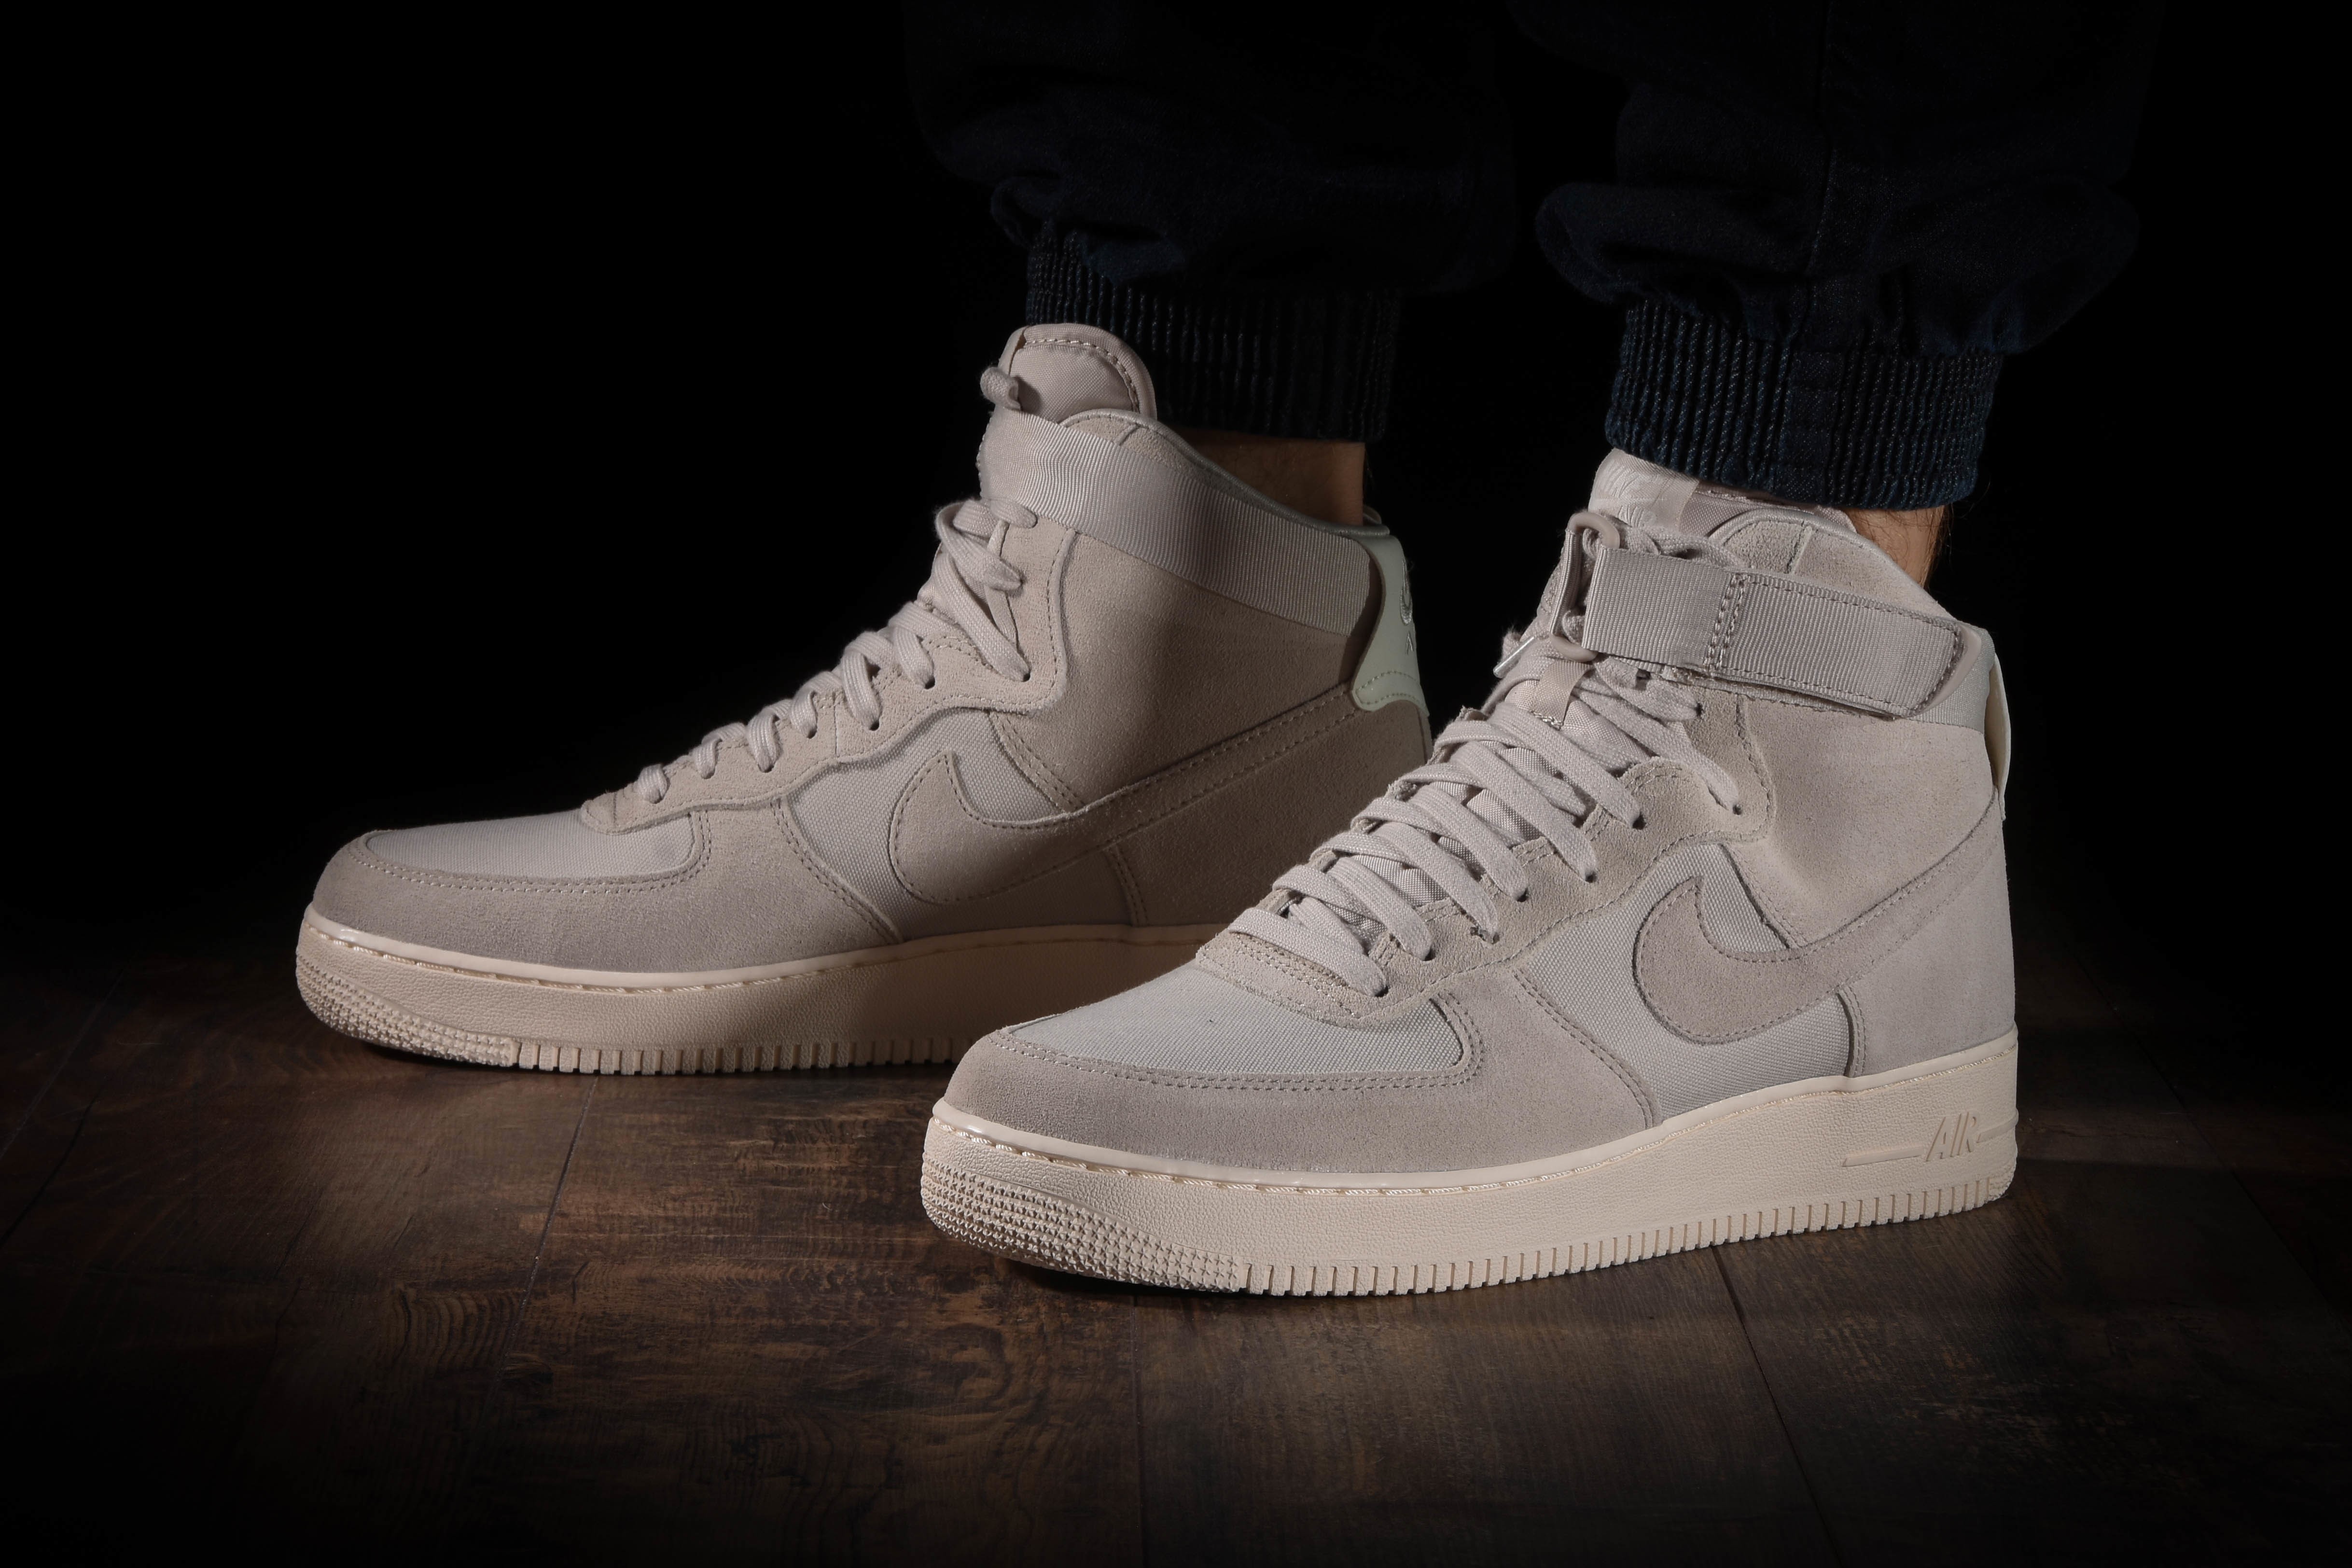 NIKE AIR FORCE 1 HIGH '07 SUEDE for £95 